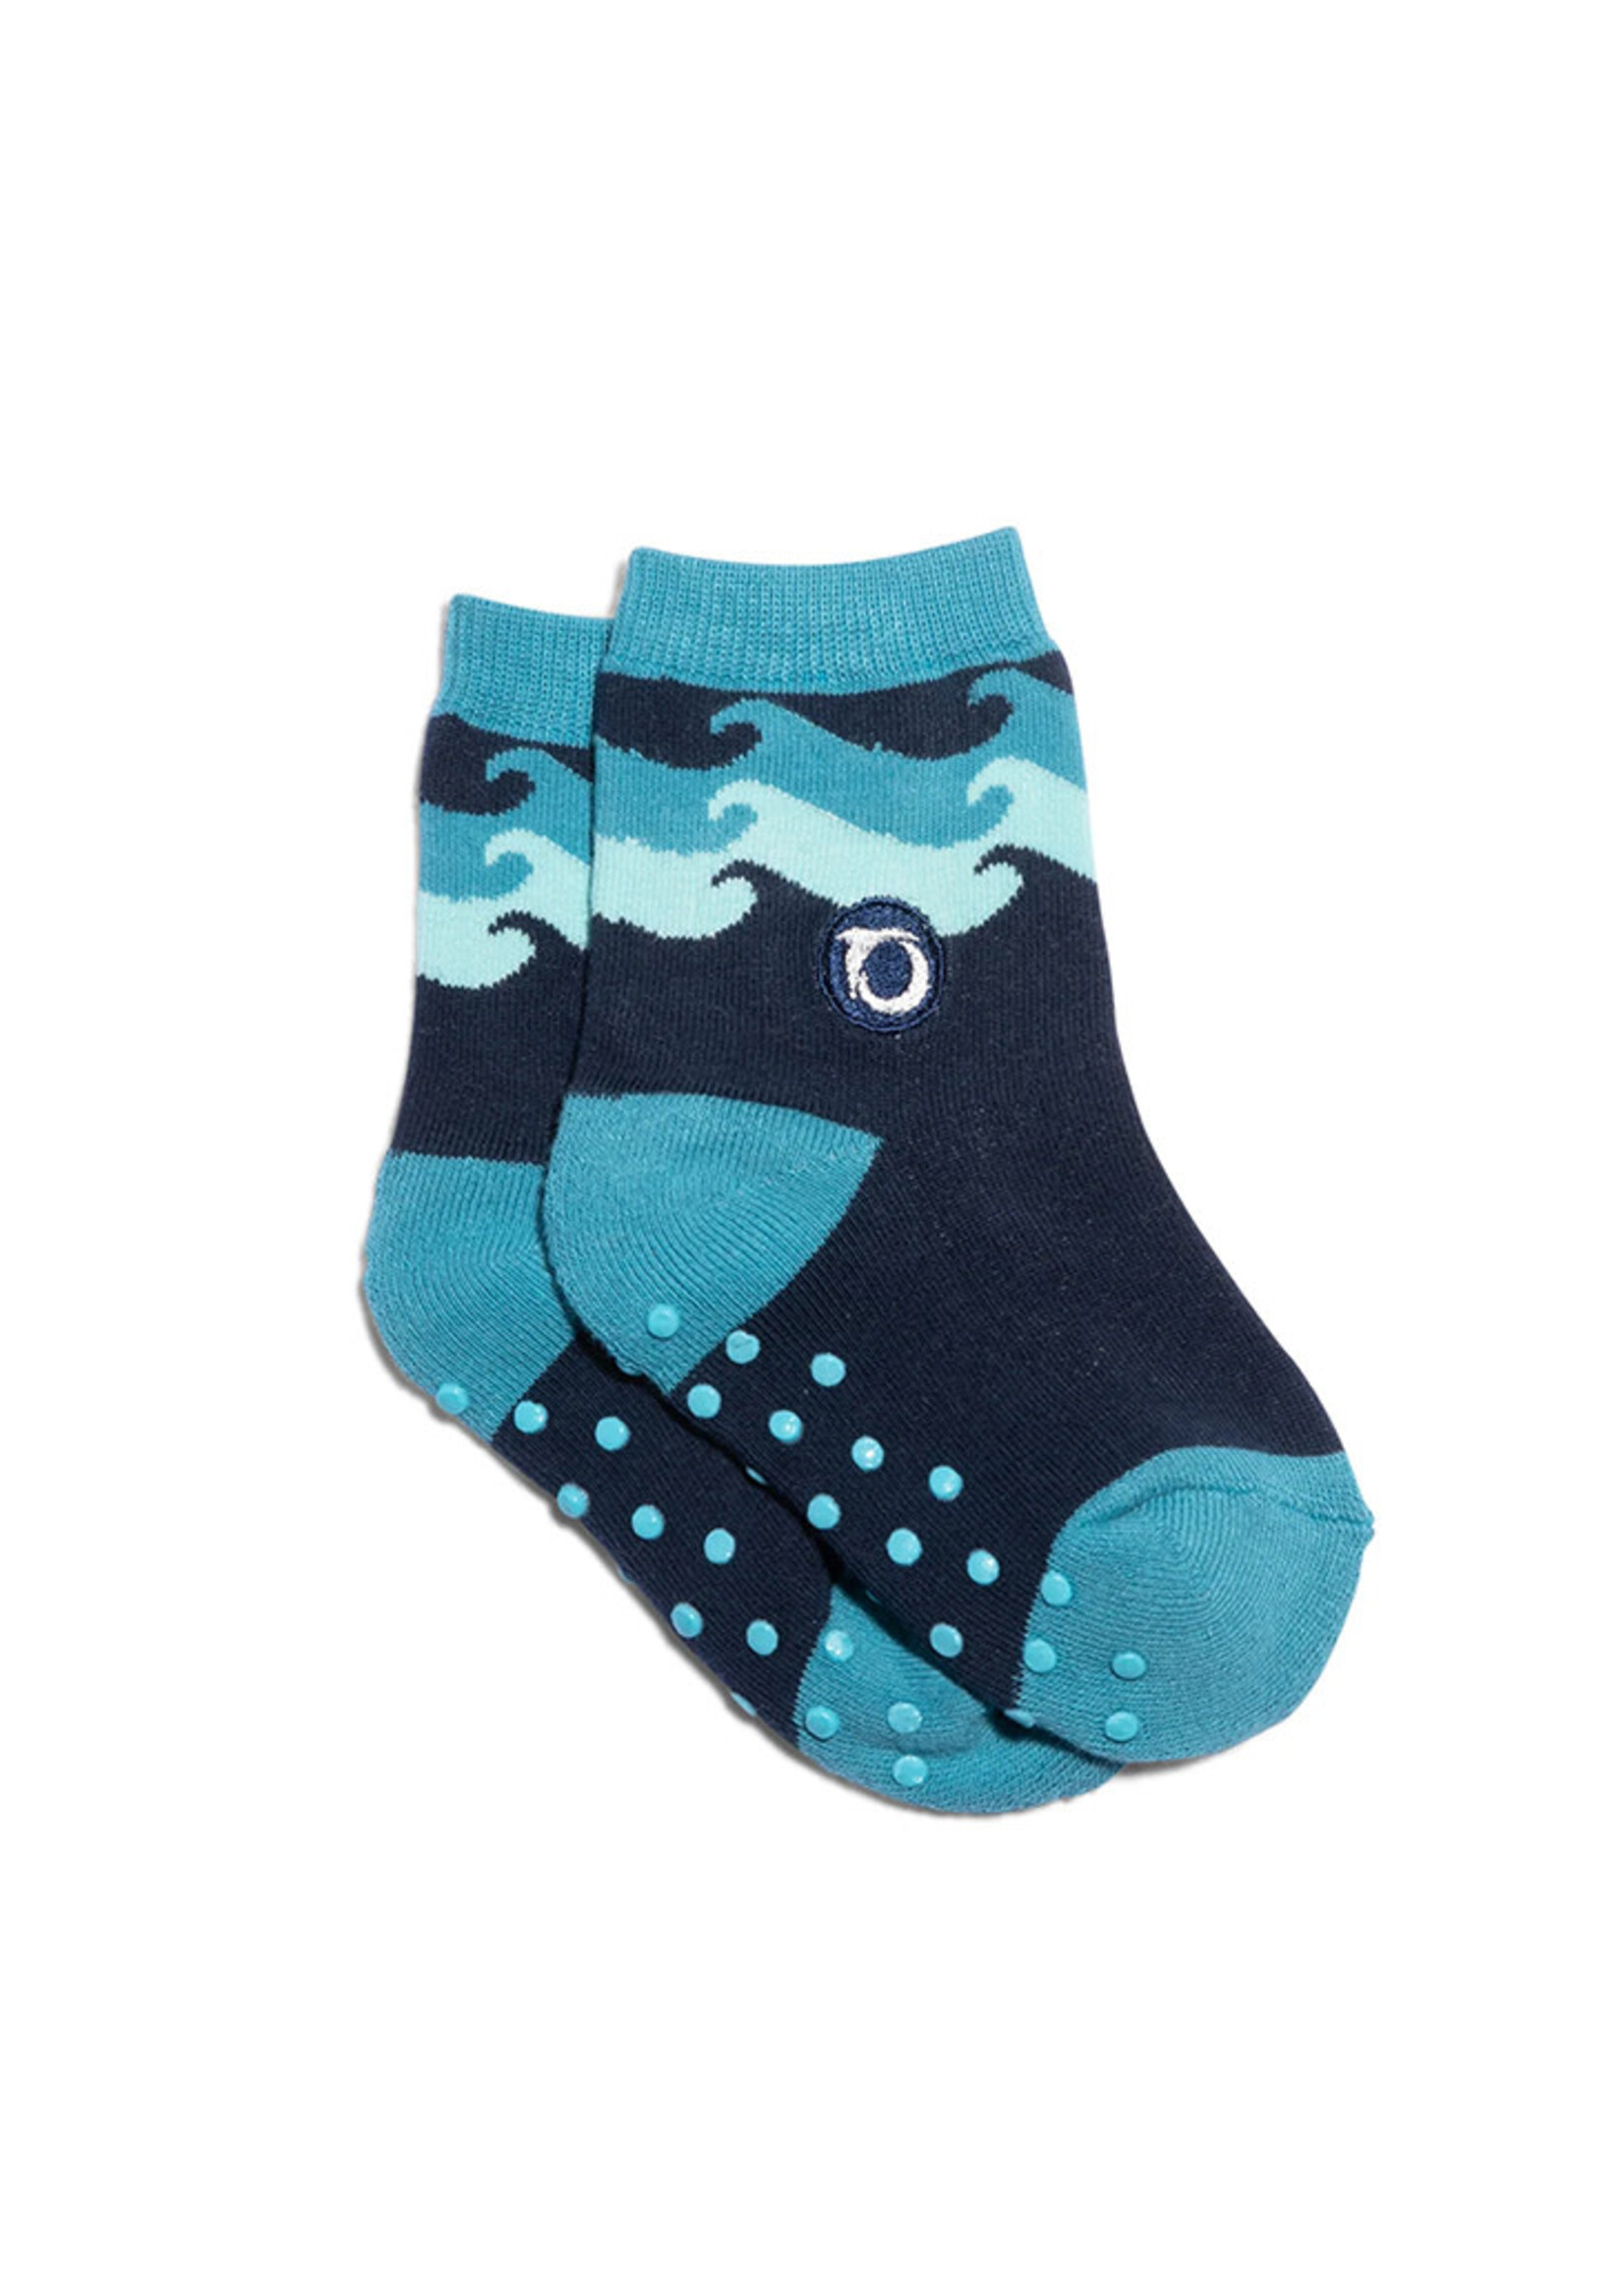 Conscious Step Kids Socks that Protect Oceans - Toddler